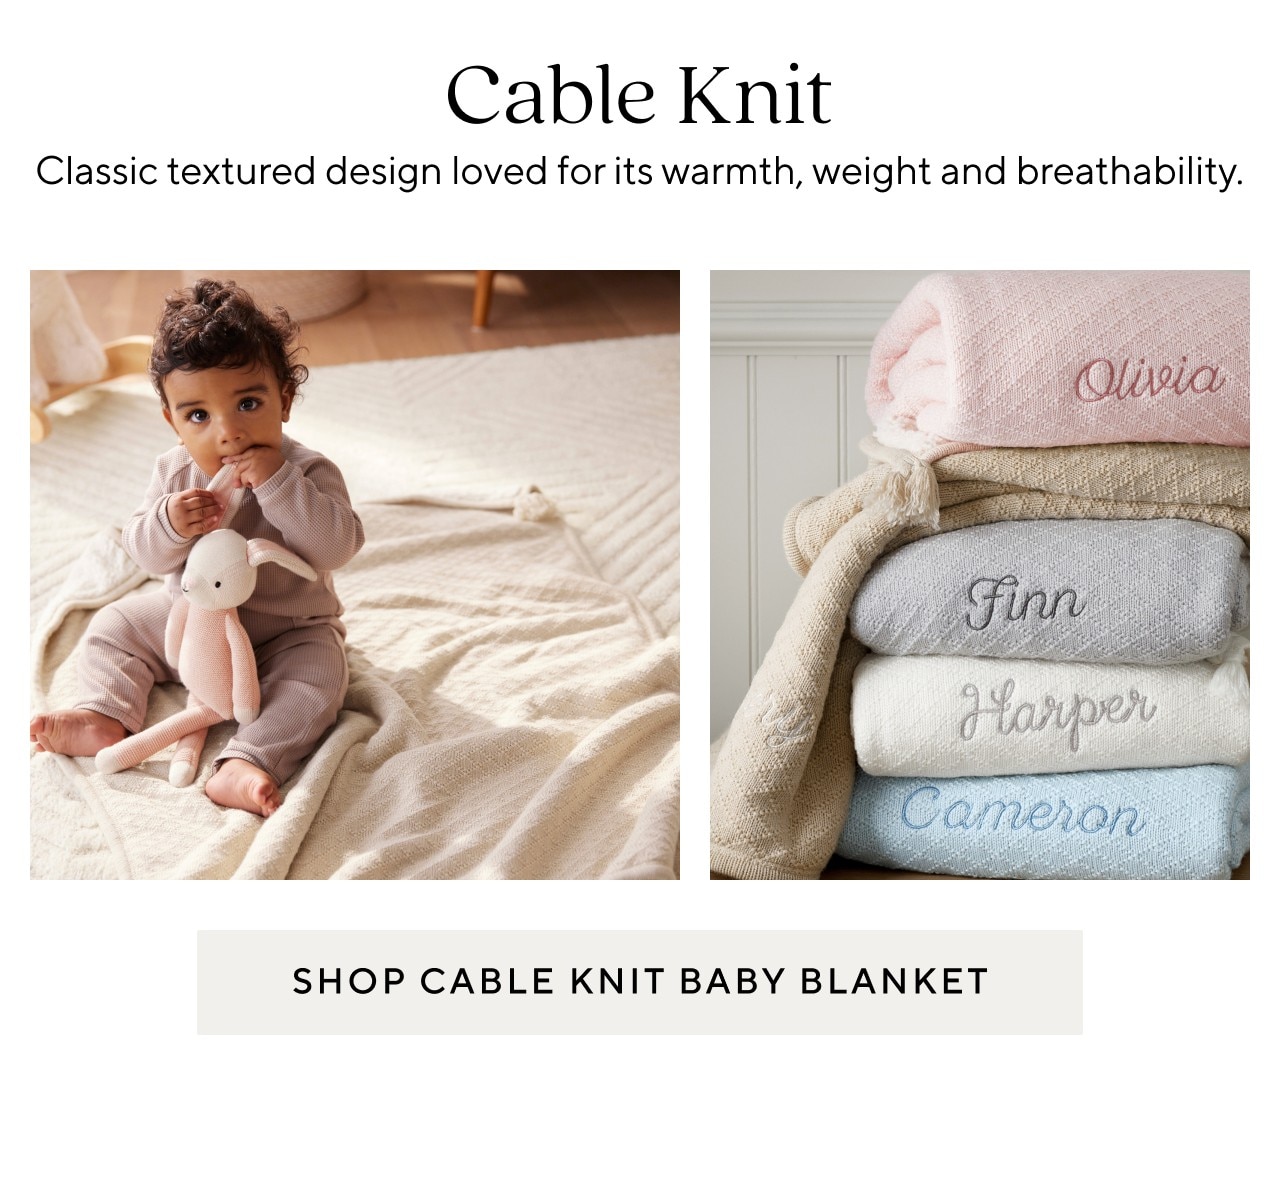 SHOP CABLE KNIT BABY BLANKET